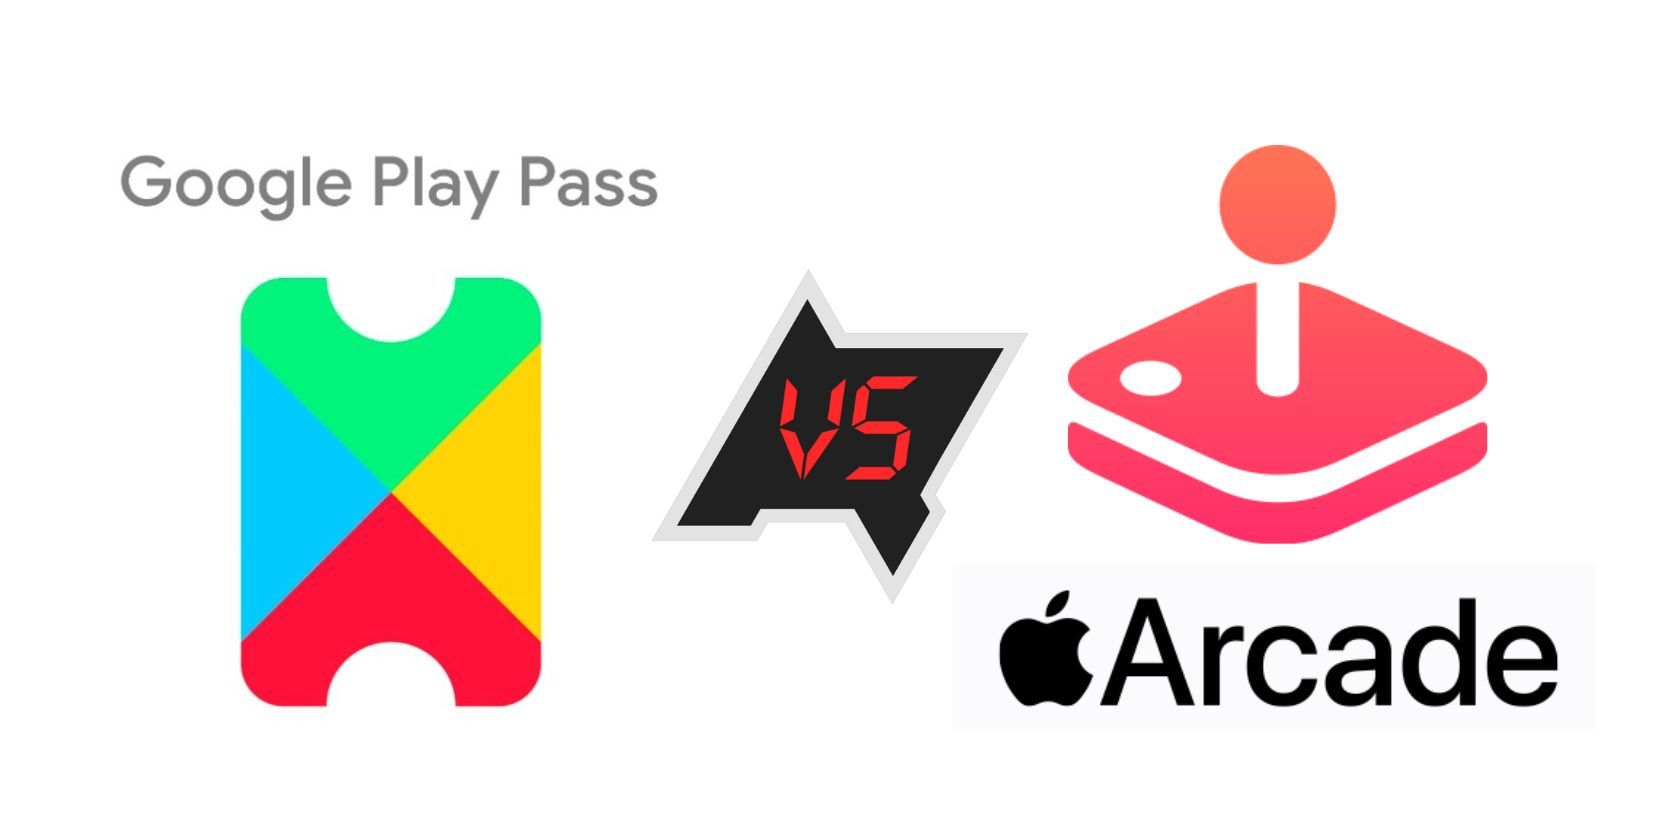 The Google Play Pass logo and the Apple Arcade logo on each side of the AndroidPolice VS logo